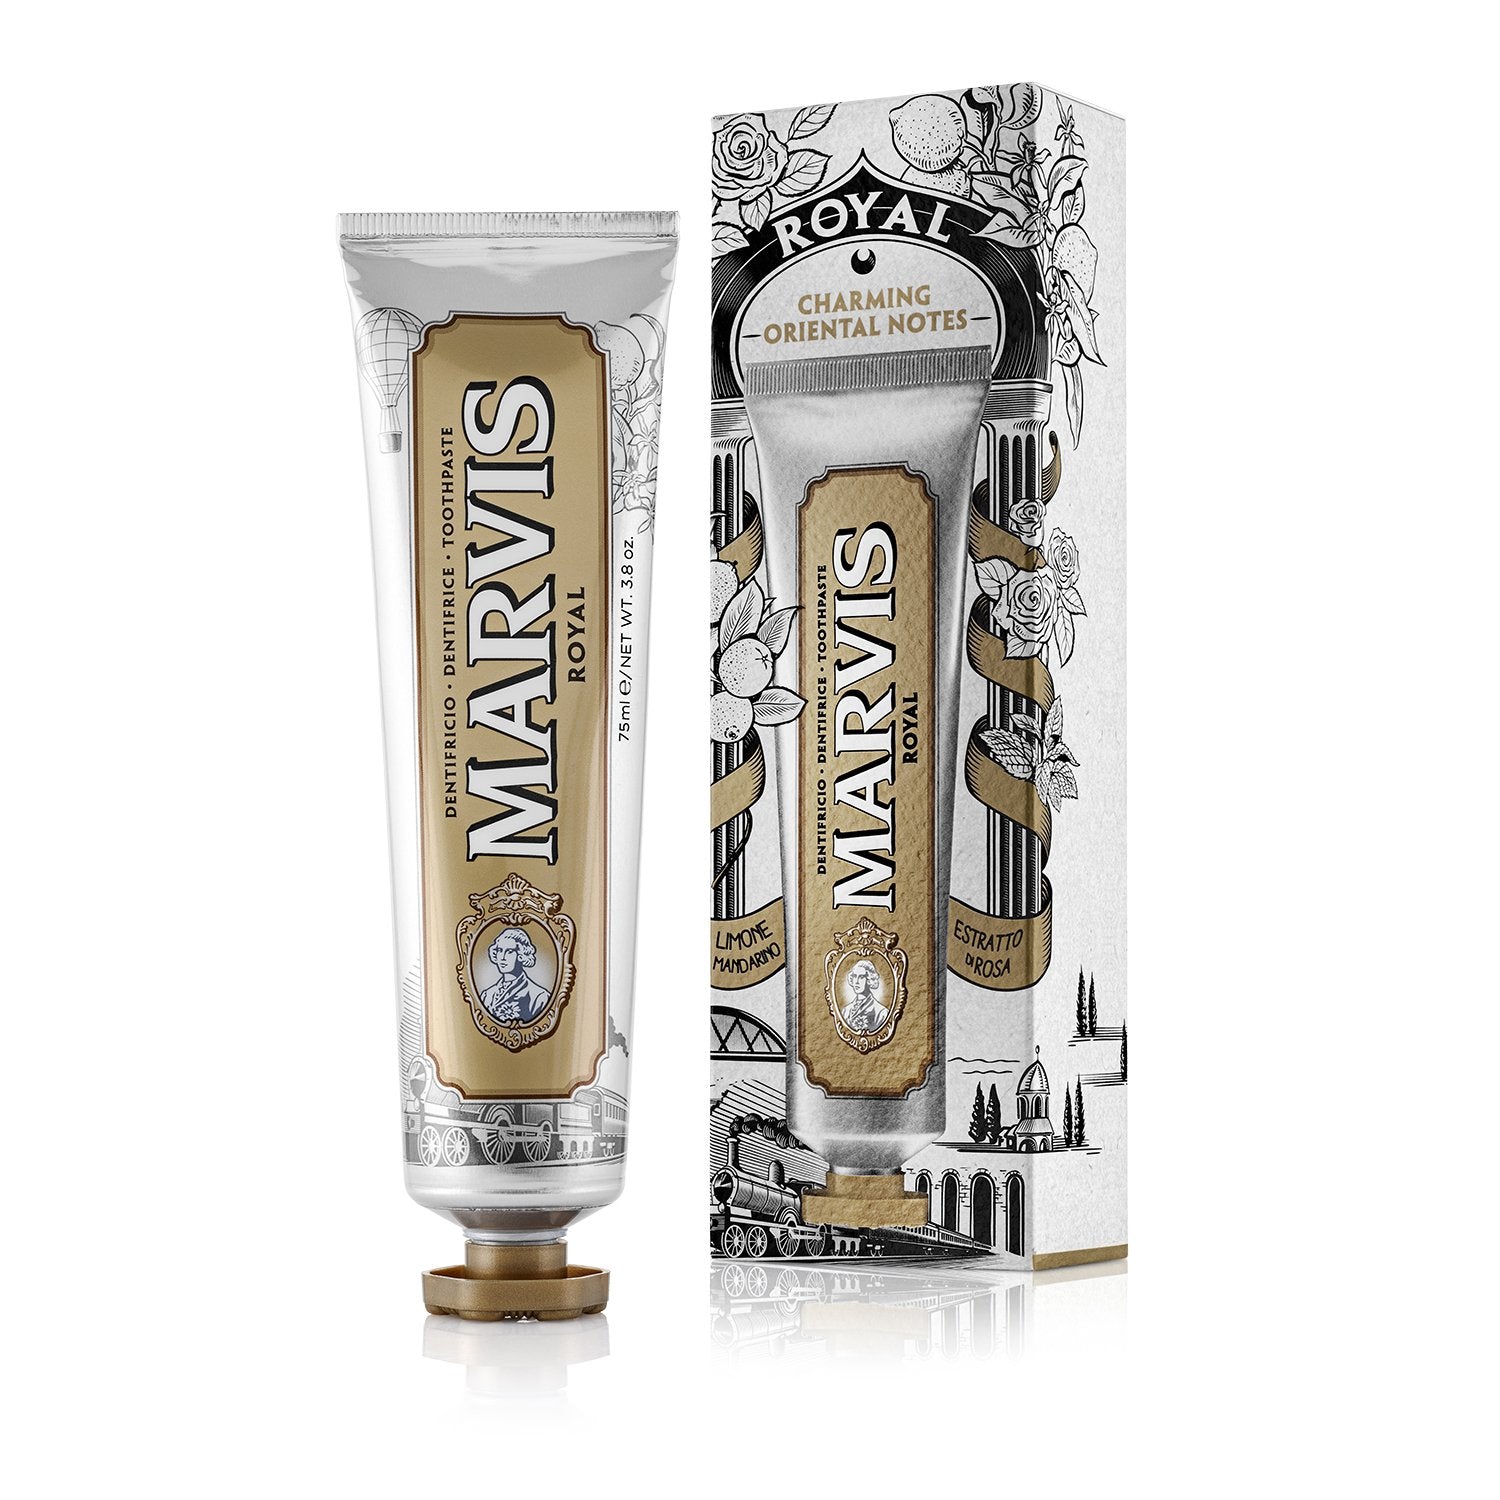 Marvis Wonders of the World ROYAL (75ml)